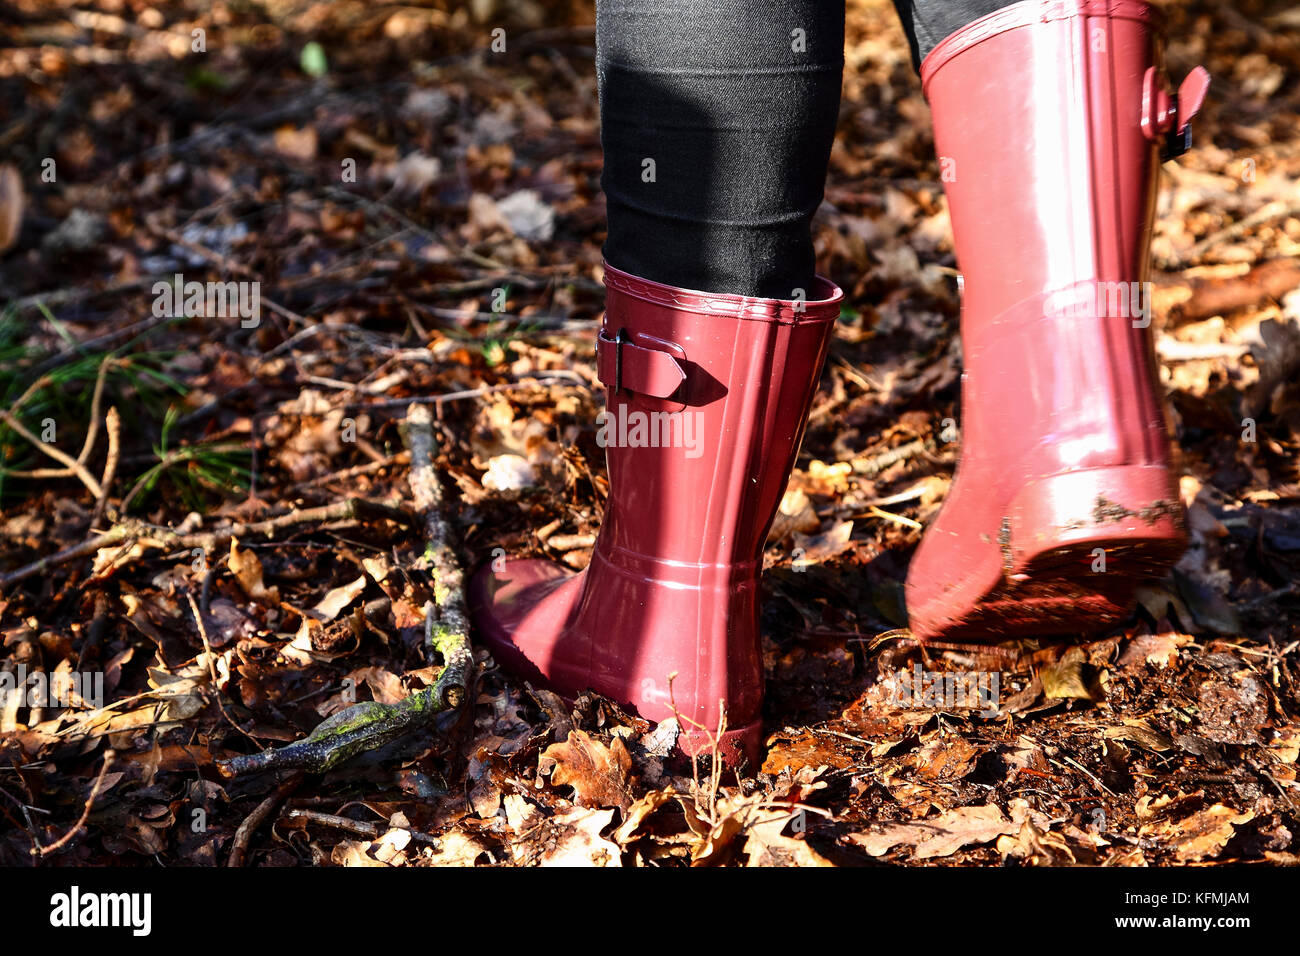 Young woman wearing wellington boots walking amongst fallen autumn leaves in the woods Stock Photo